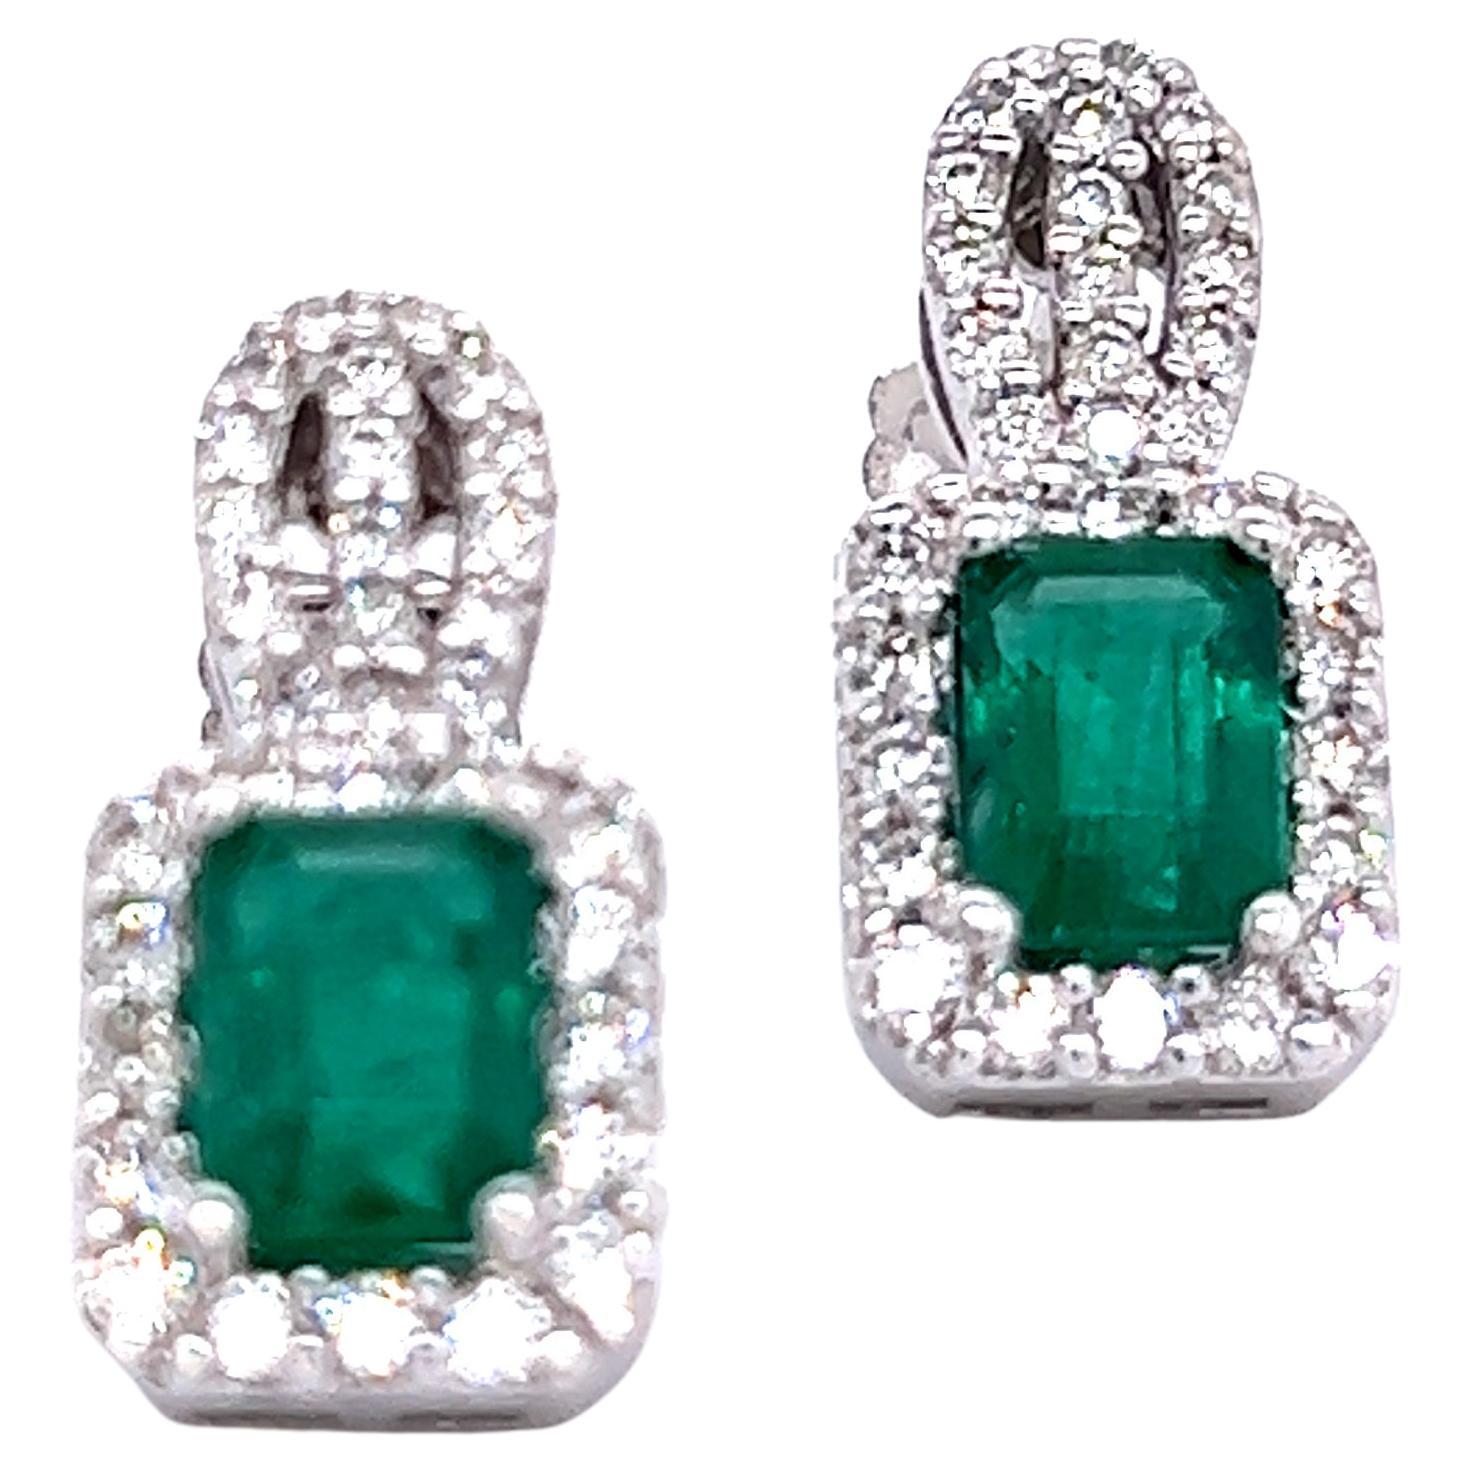 Natural Emerald Diamond Stud Earrings 14k Gold 2.74 TCW Certified For Sale